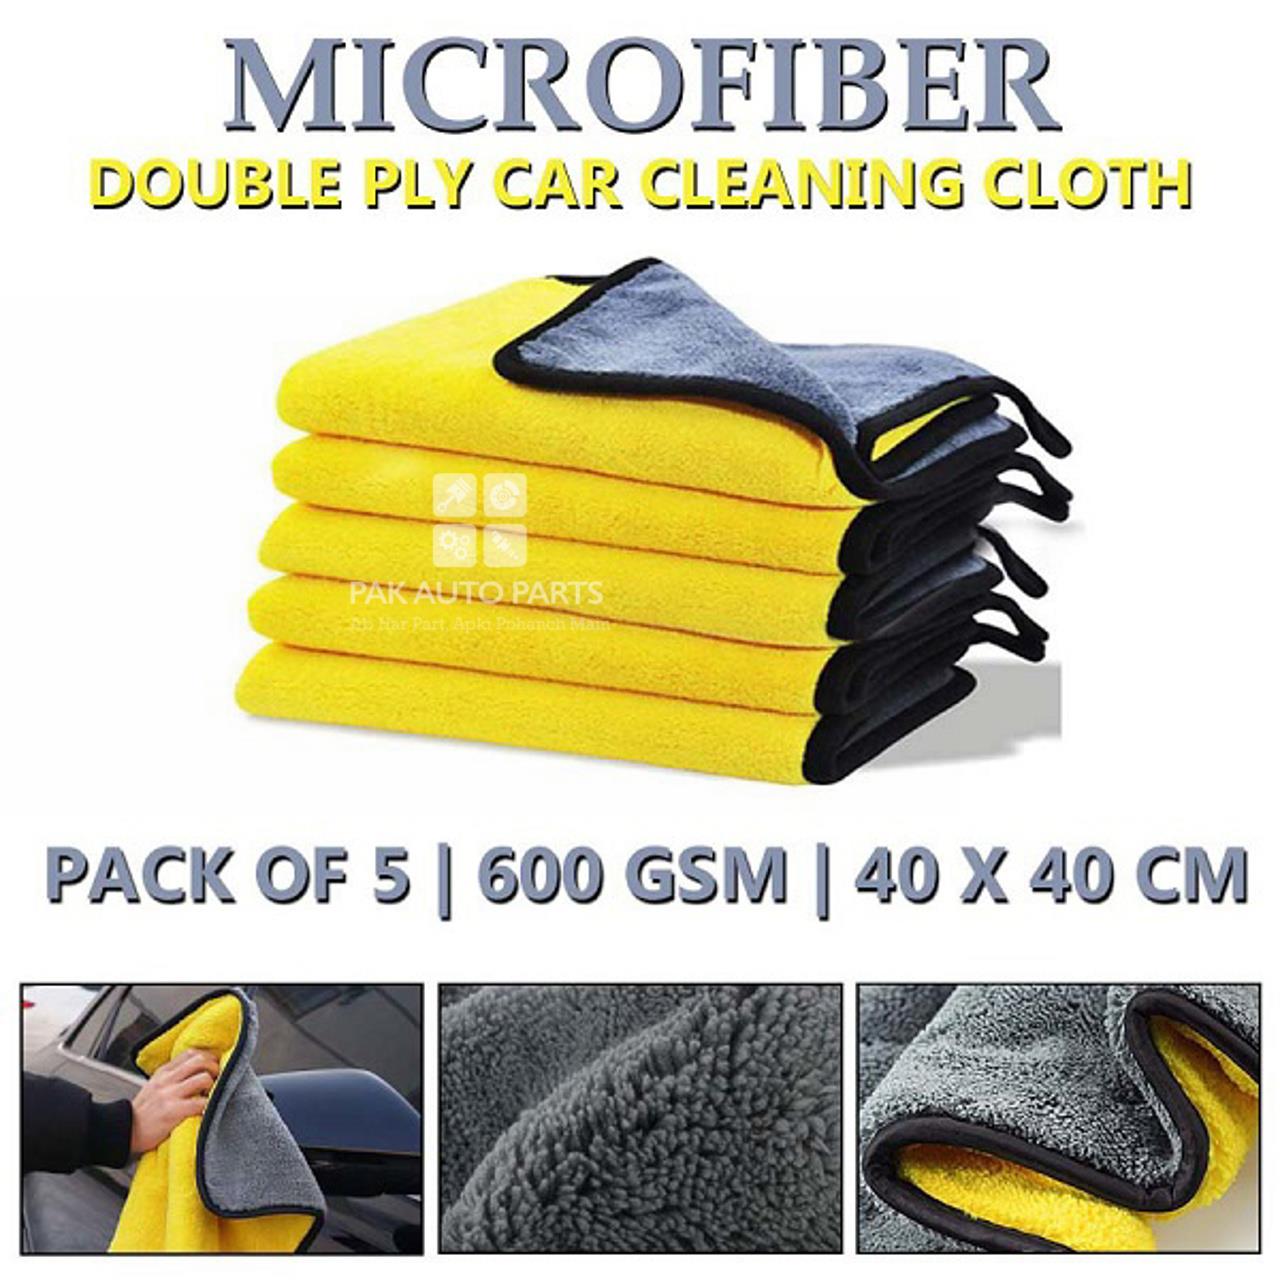 Picture of New Design Microfiber (Pack Of 5 ) Cleaning Cloth / Towel – Gray and Yellow (850 GSM 40*40 ) Multi-Purposes